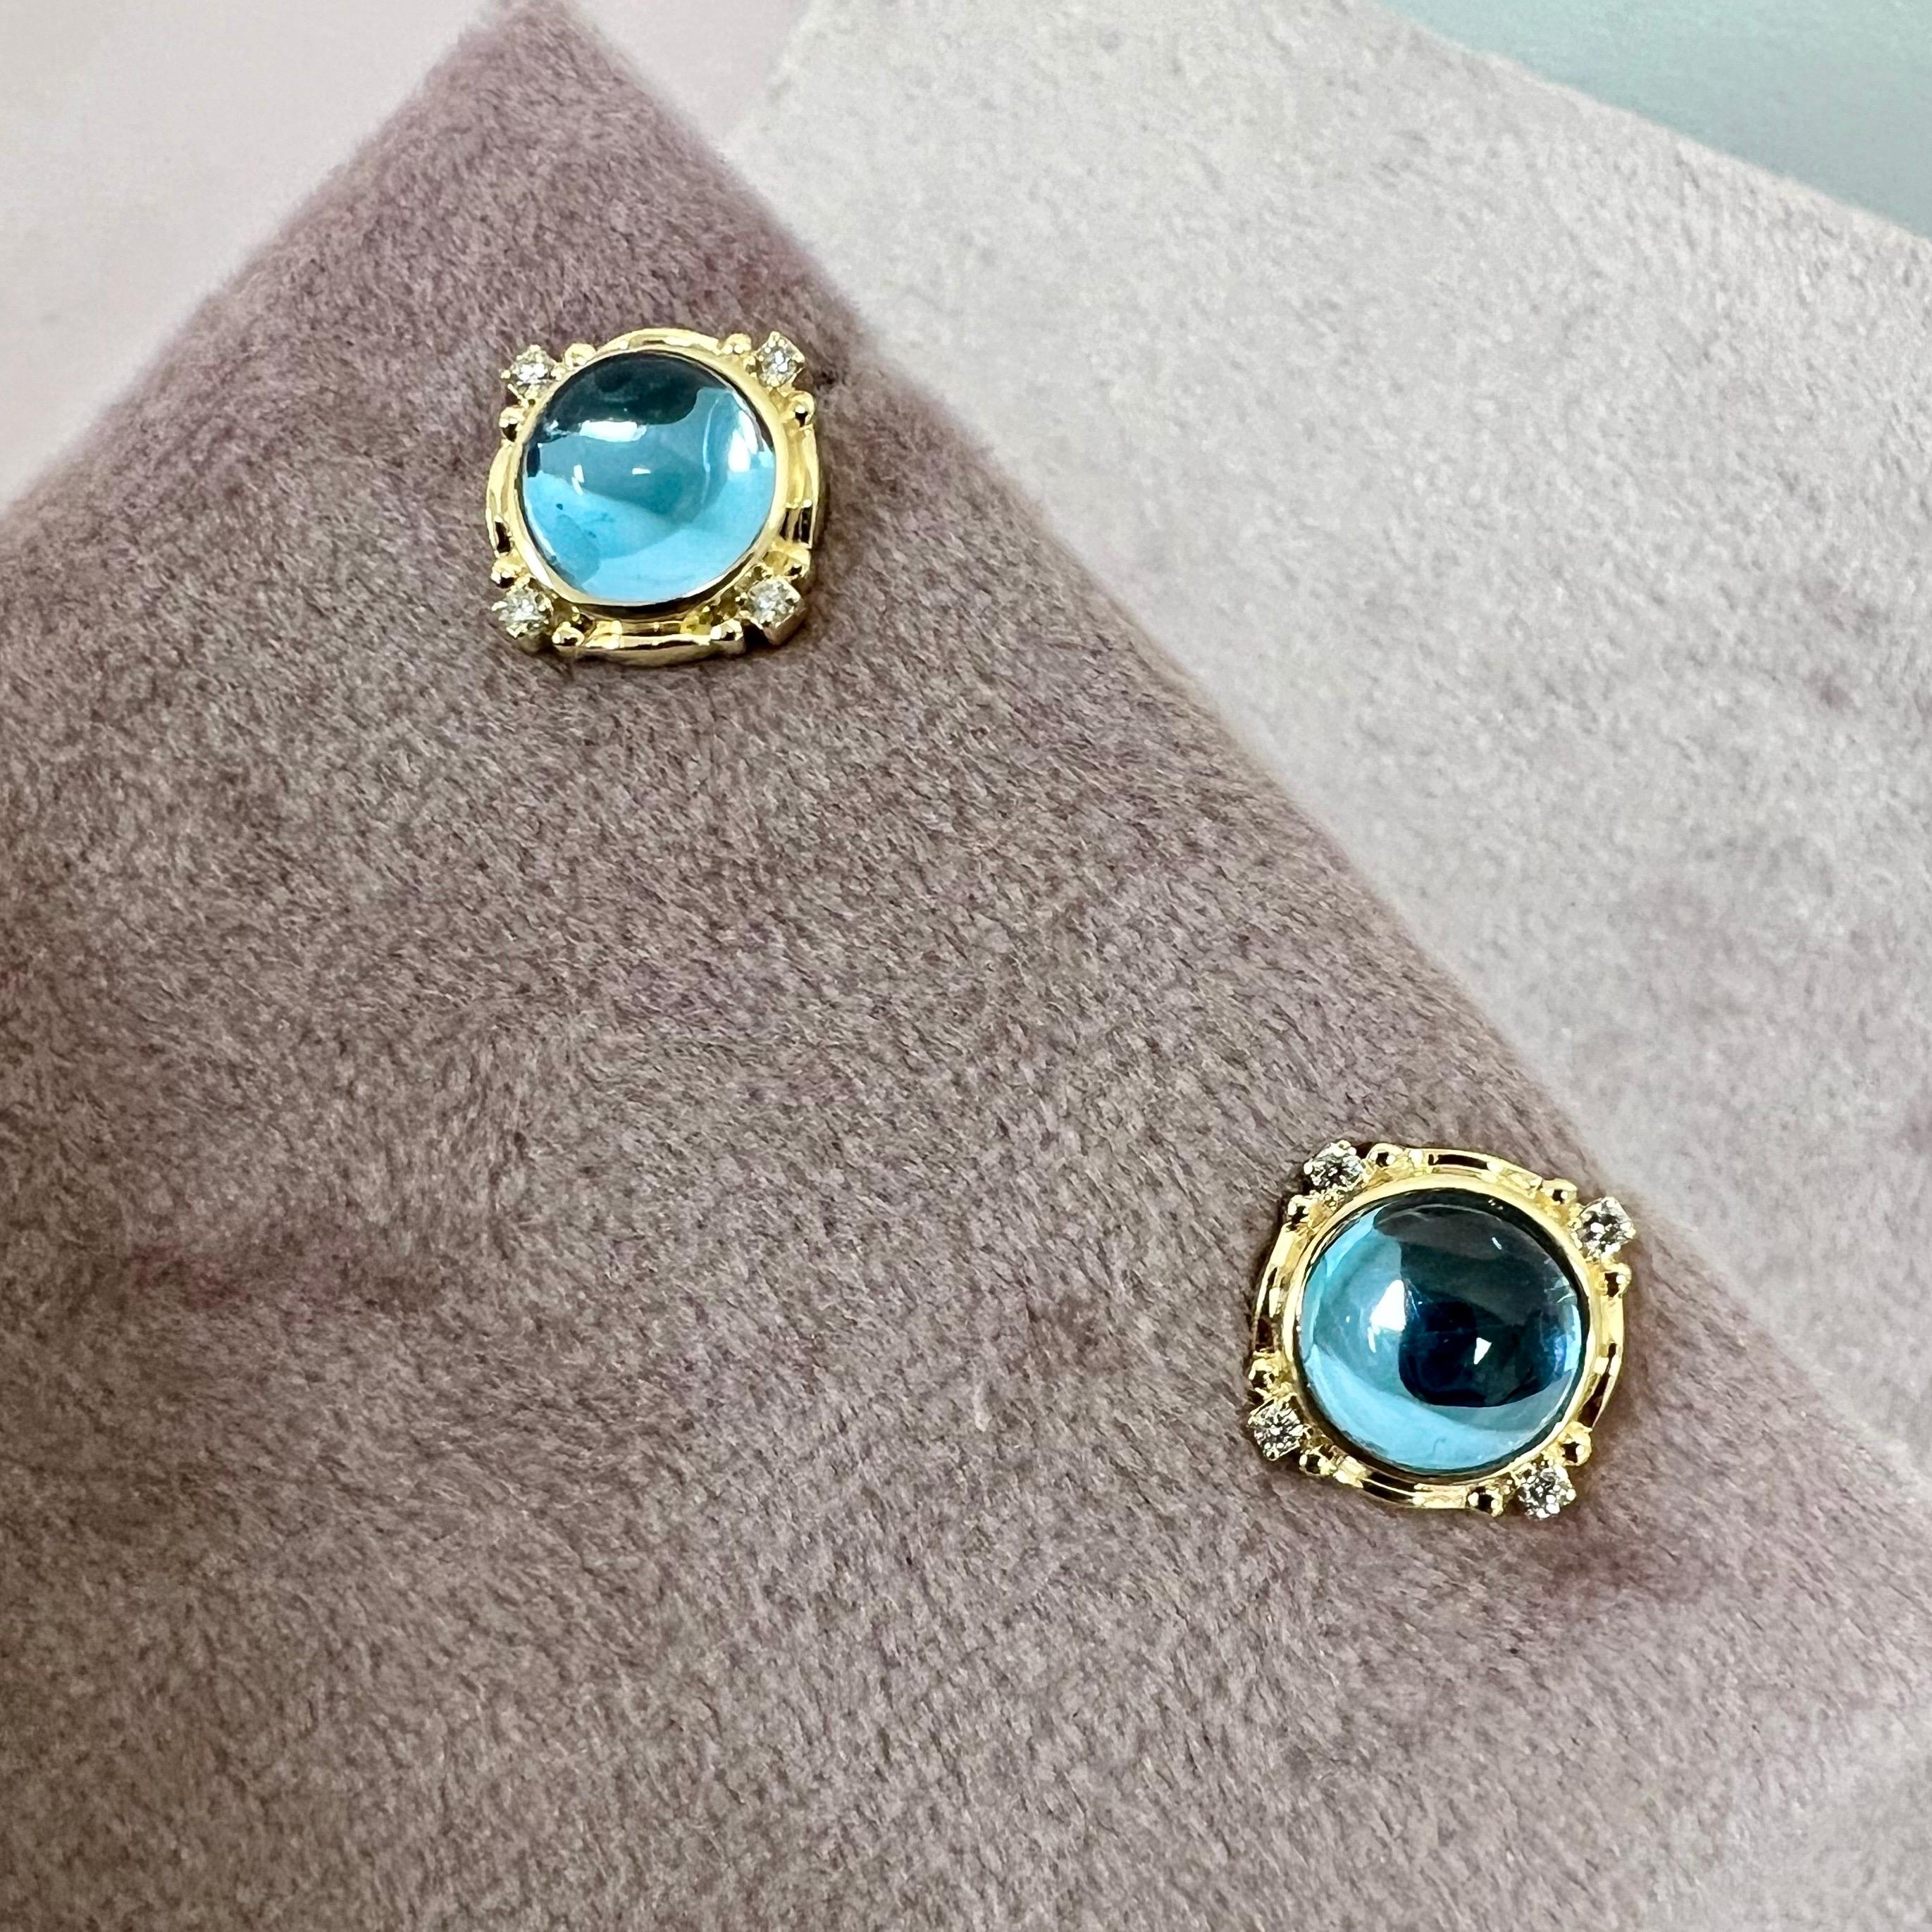 Created in 18 karat yellow gold
London blue topaz 6 carats approx.
Diamonds 0.09 carat approx.
Post backs for pierced ears
Limited edition

These exquisite, limited edition earrings, crafted in 18 karat yellow gold, showcase a dazzling combination